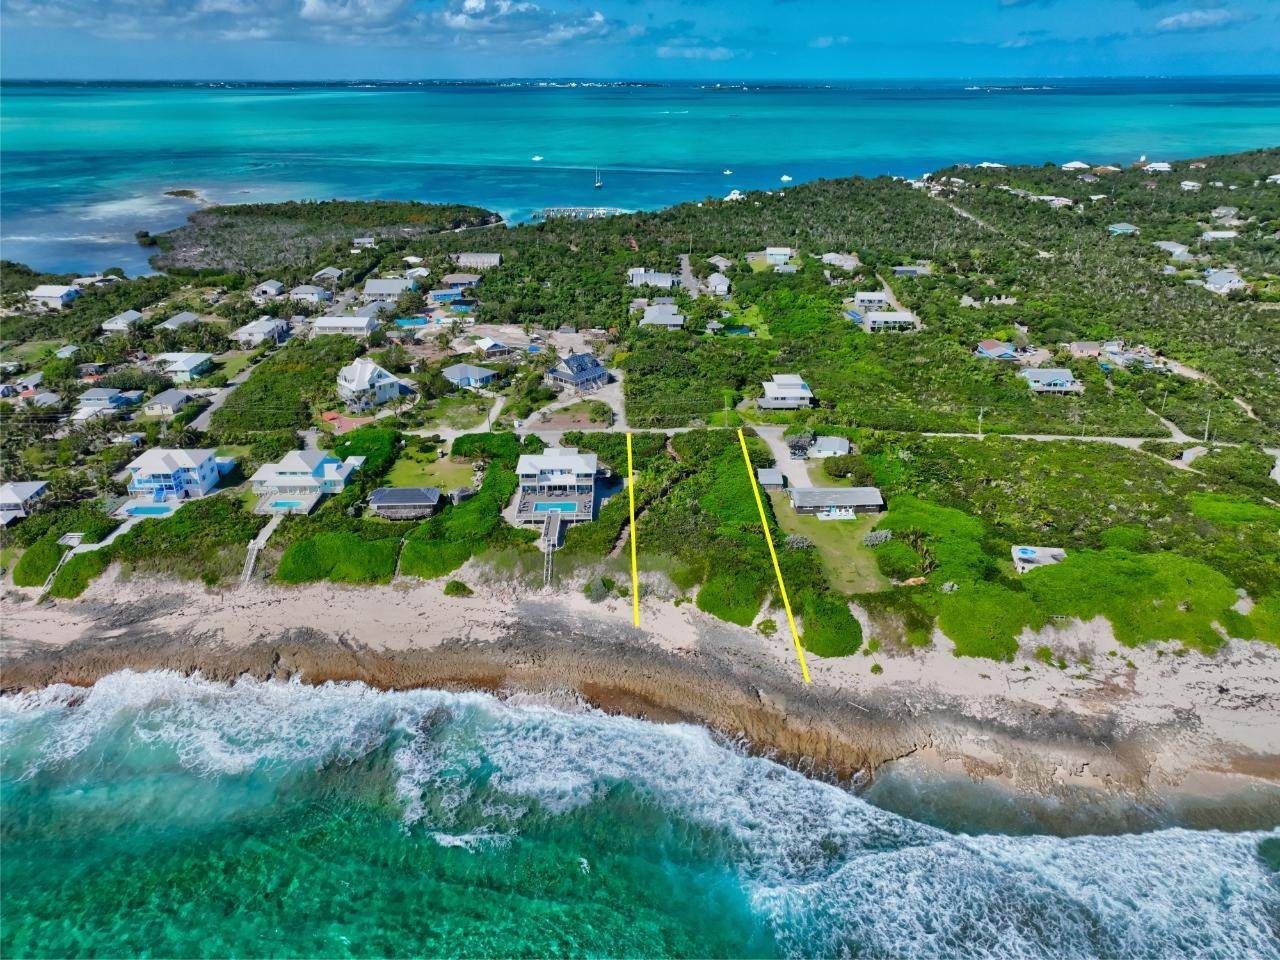 4. Lots / Acreage for Sale at Hope Town, Abaco, Bahamas